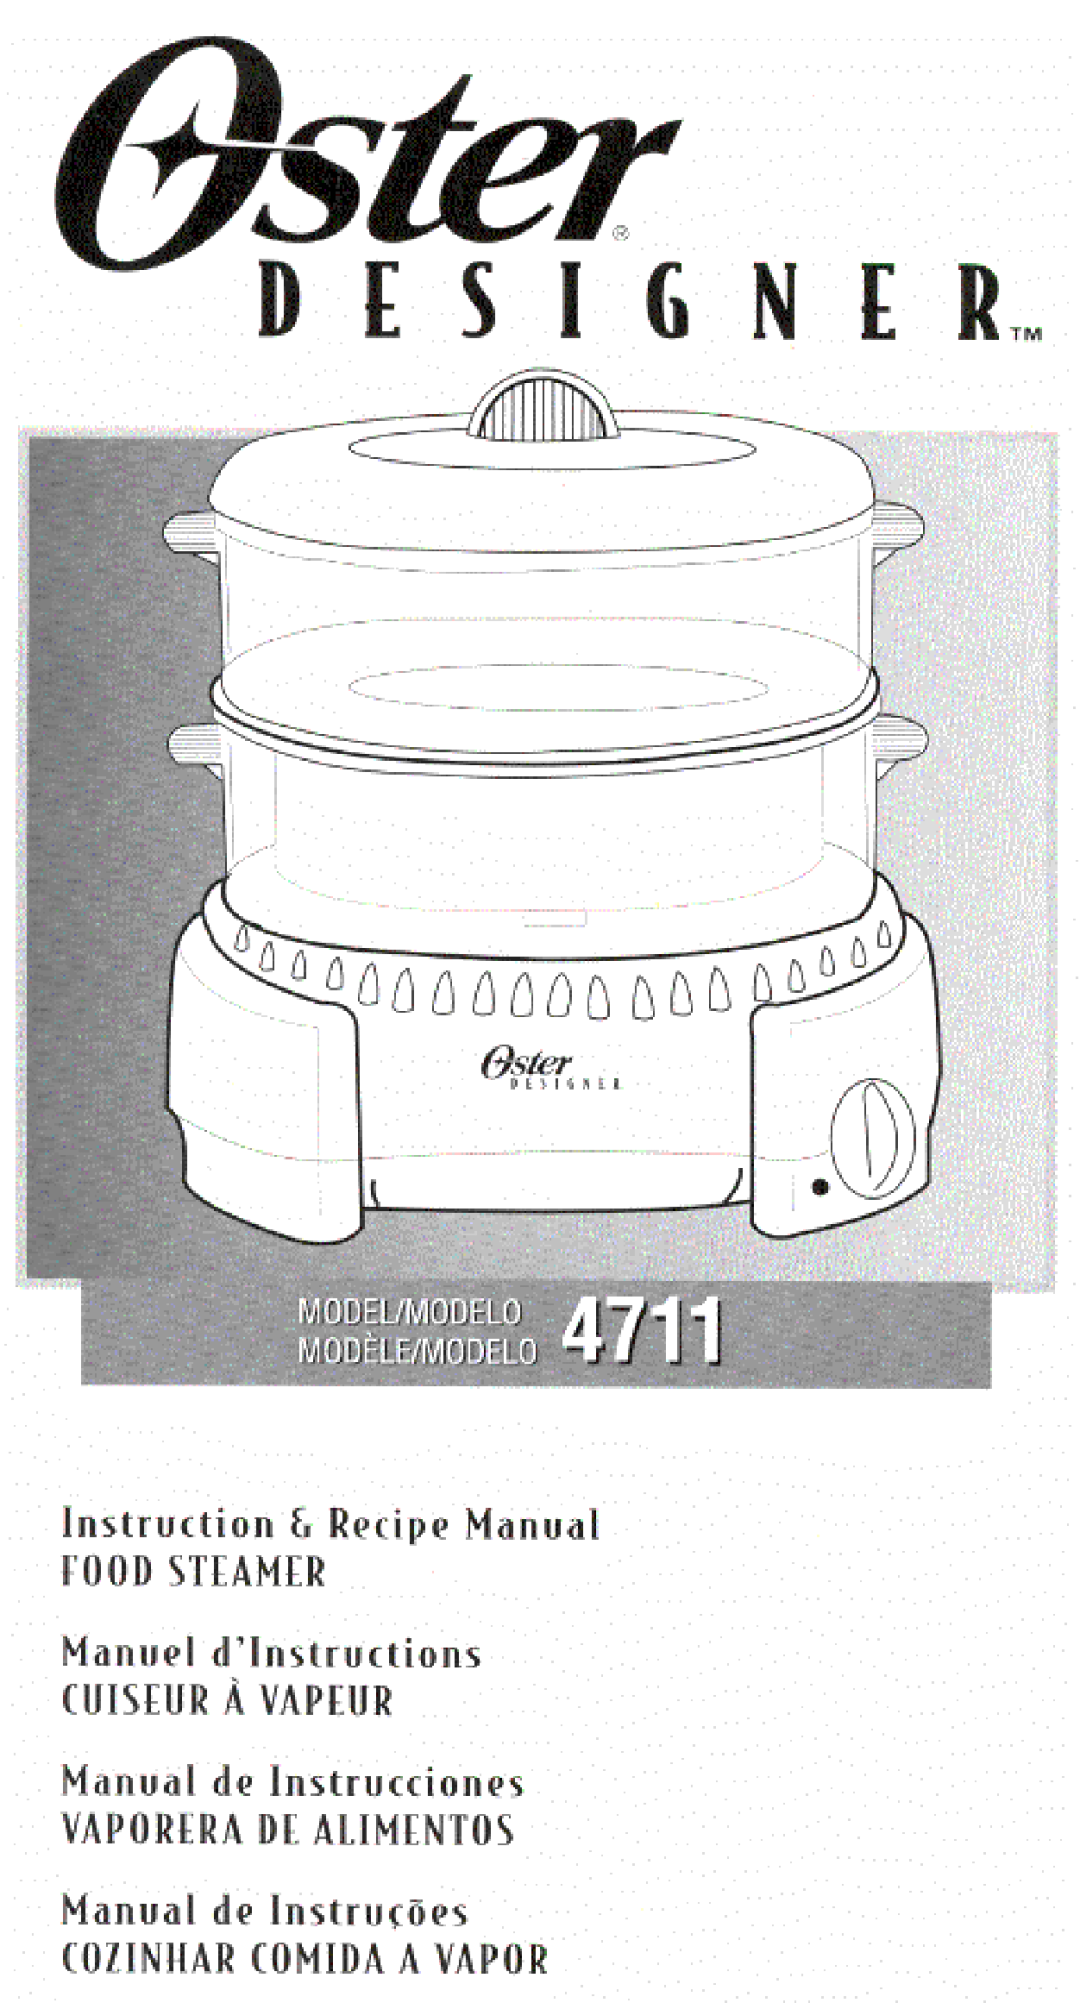 Oster 4711 manual 